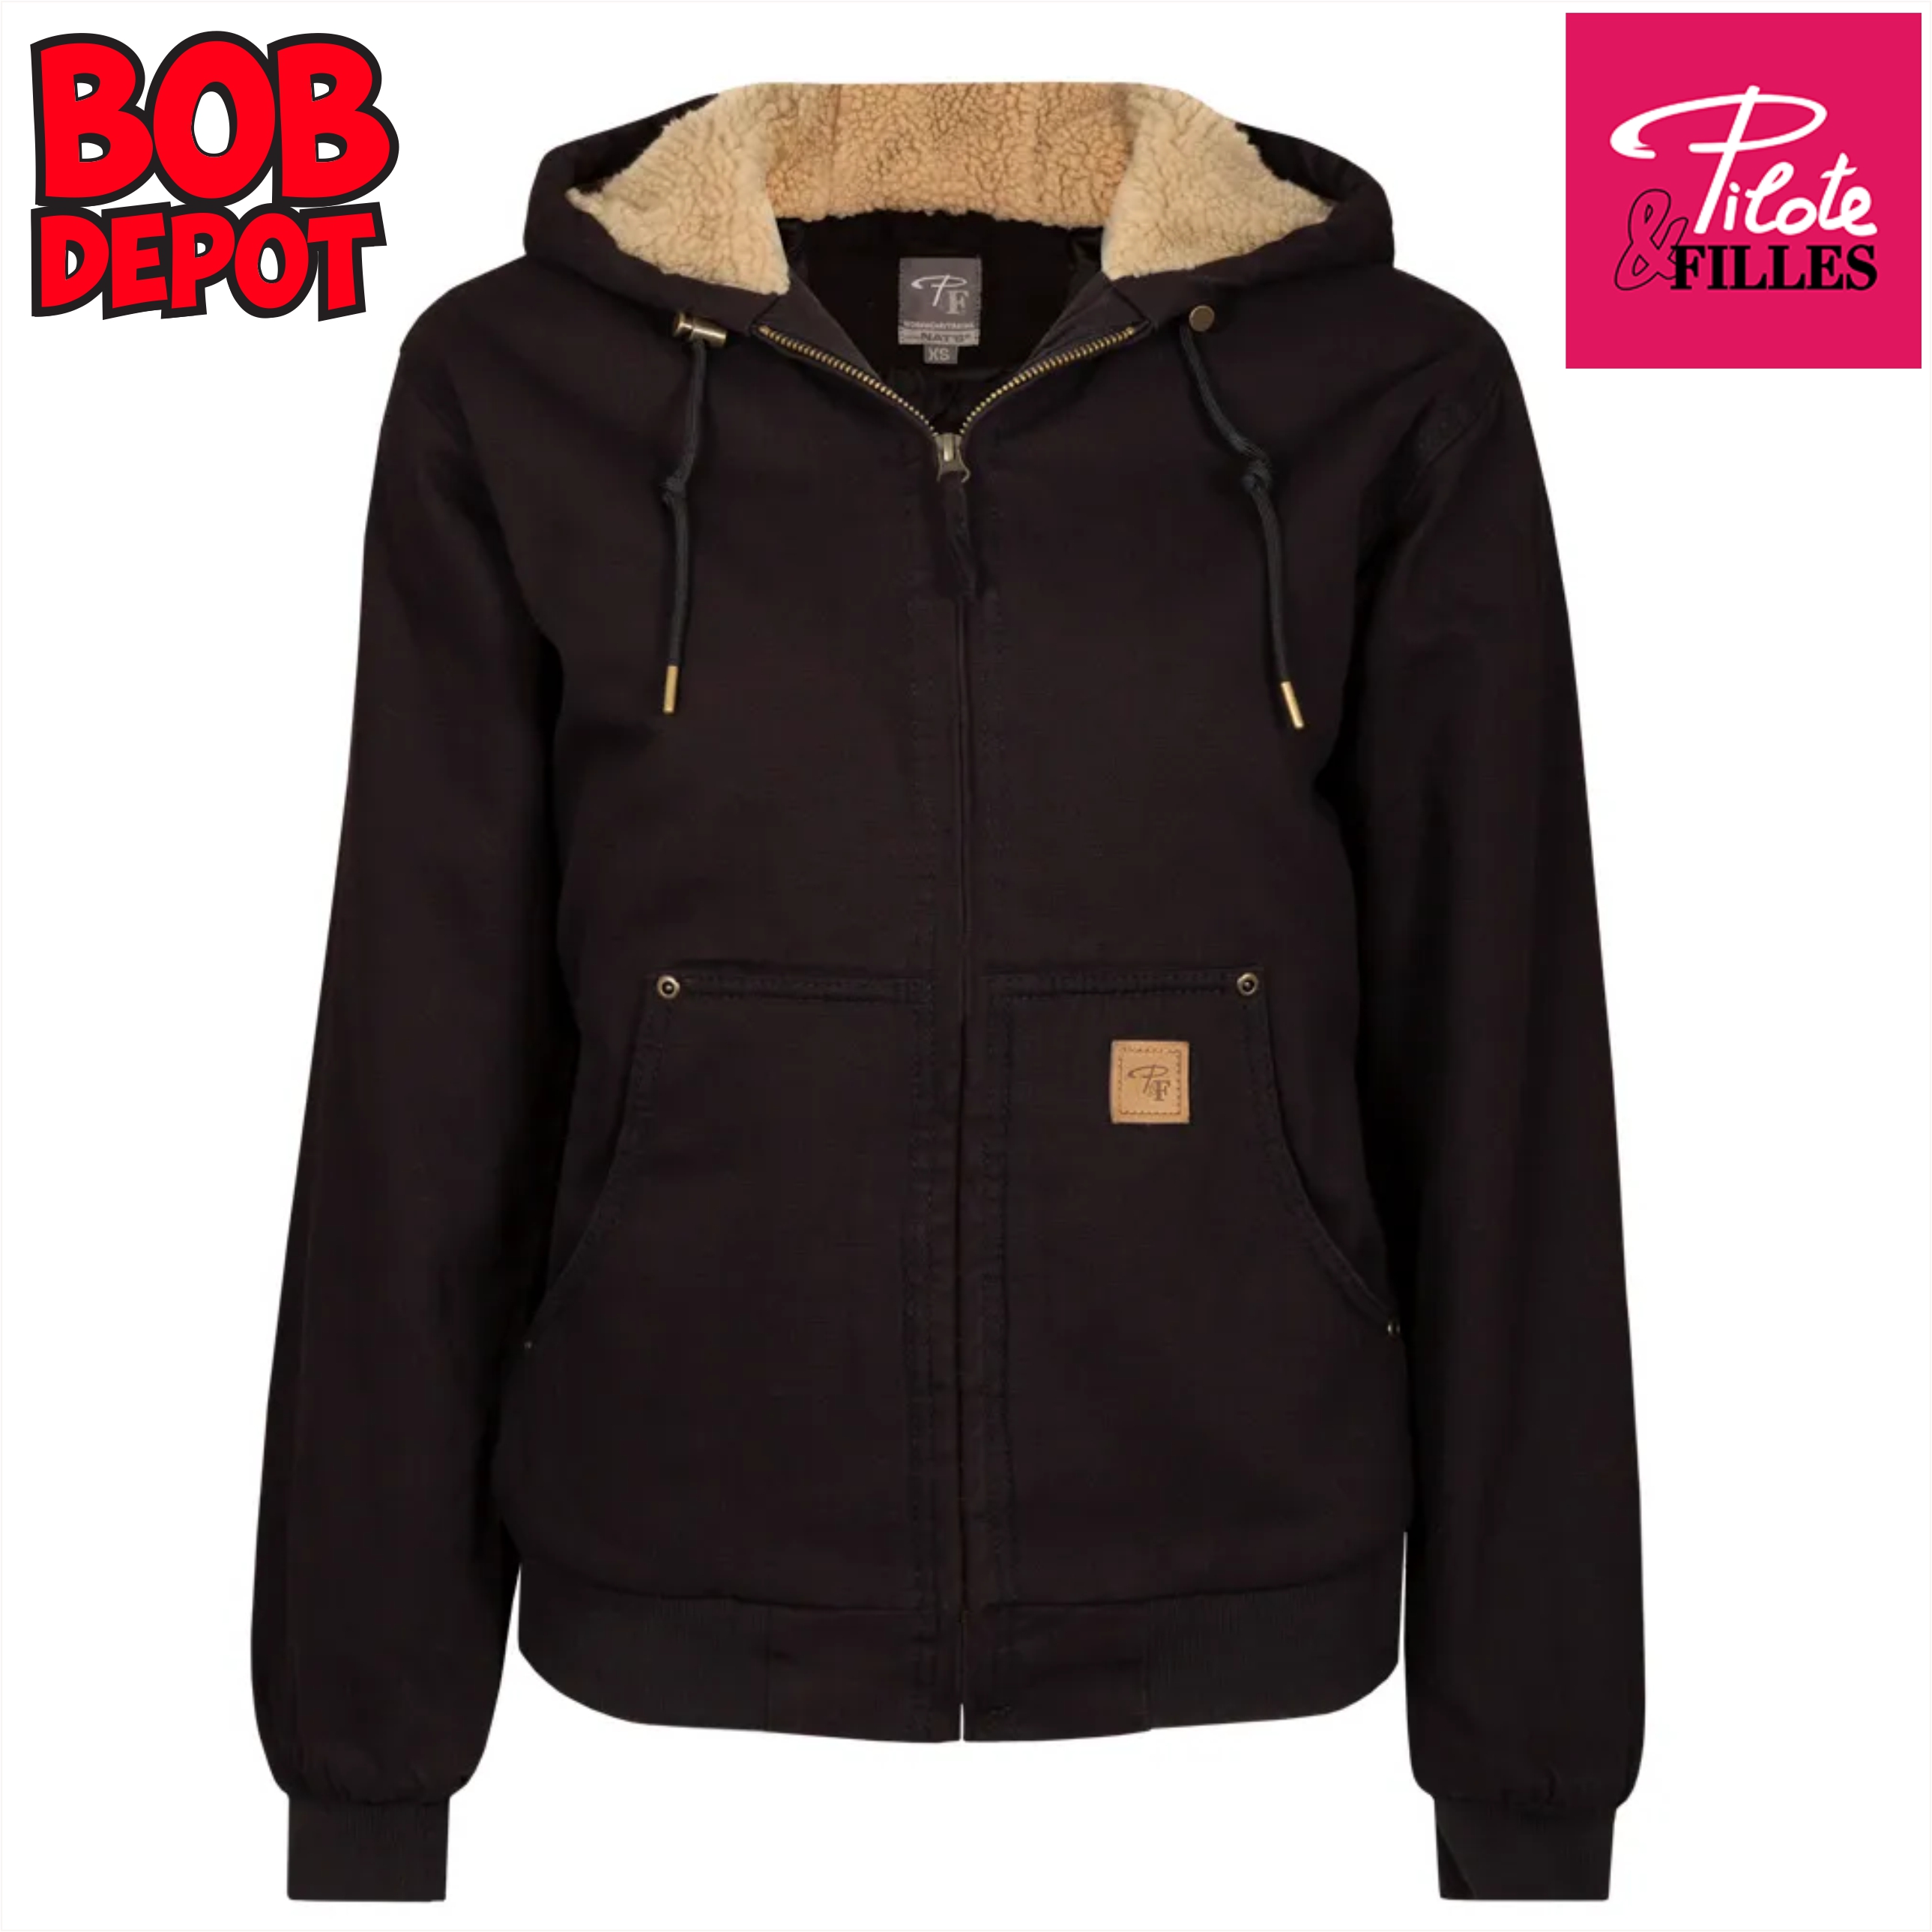 Manteau ducktwill style « BOMBER »